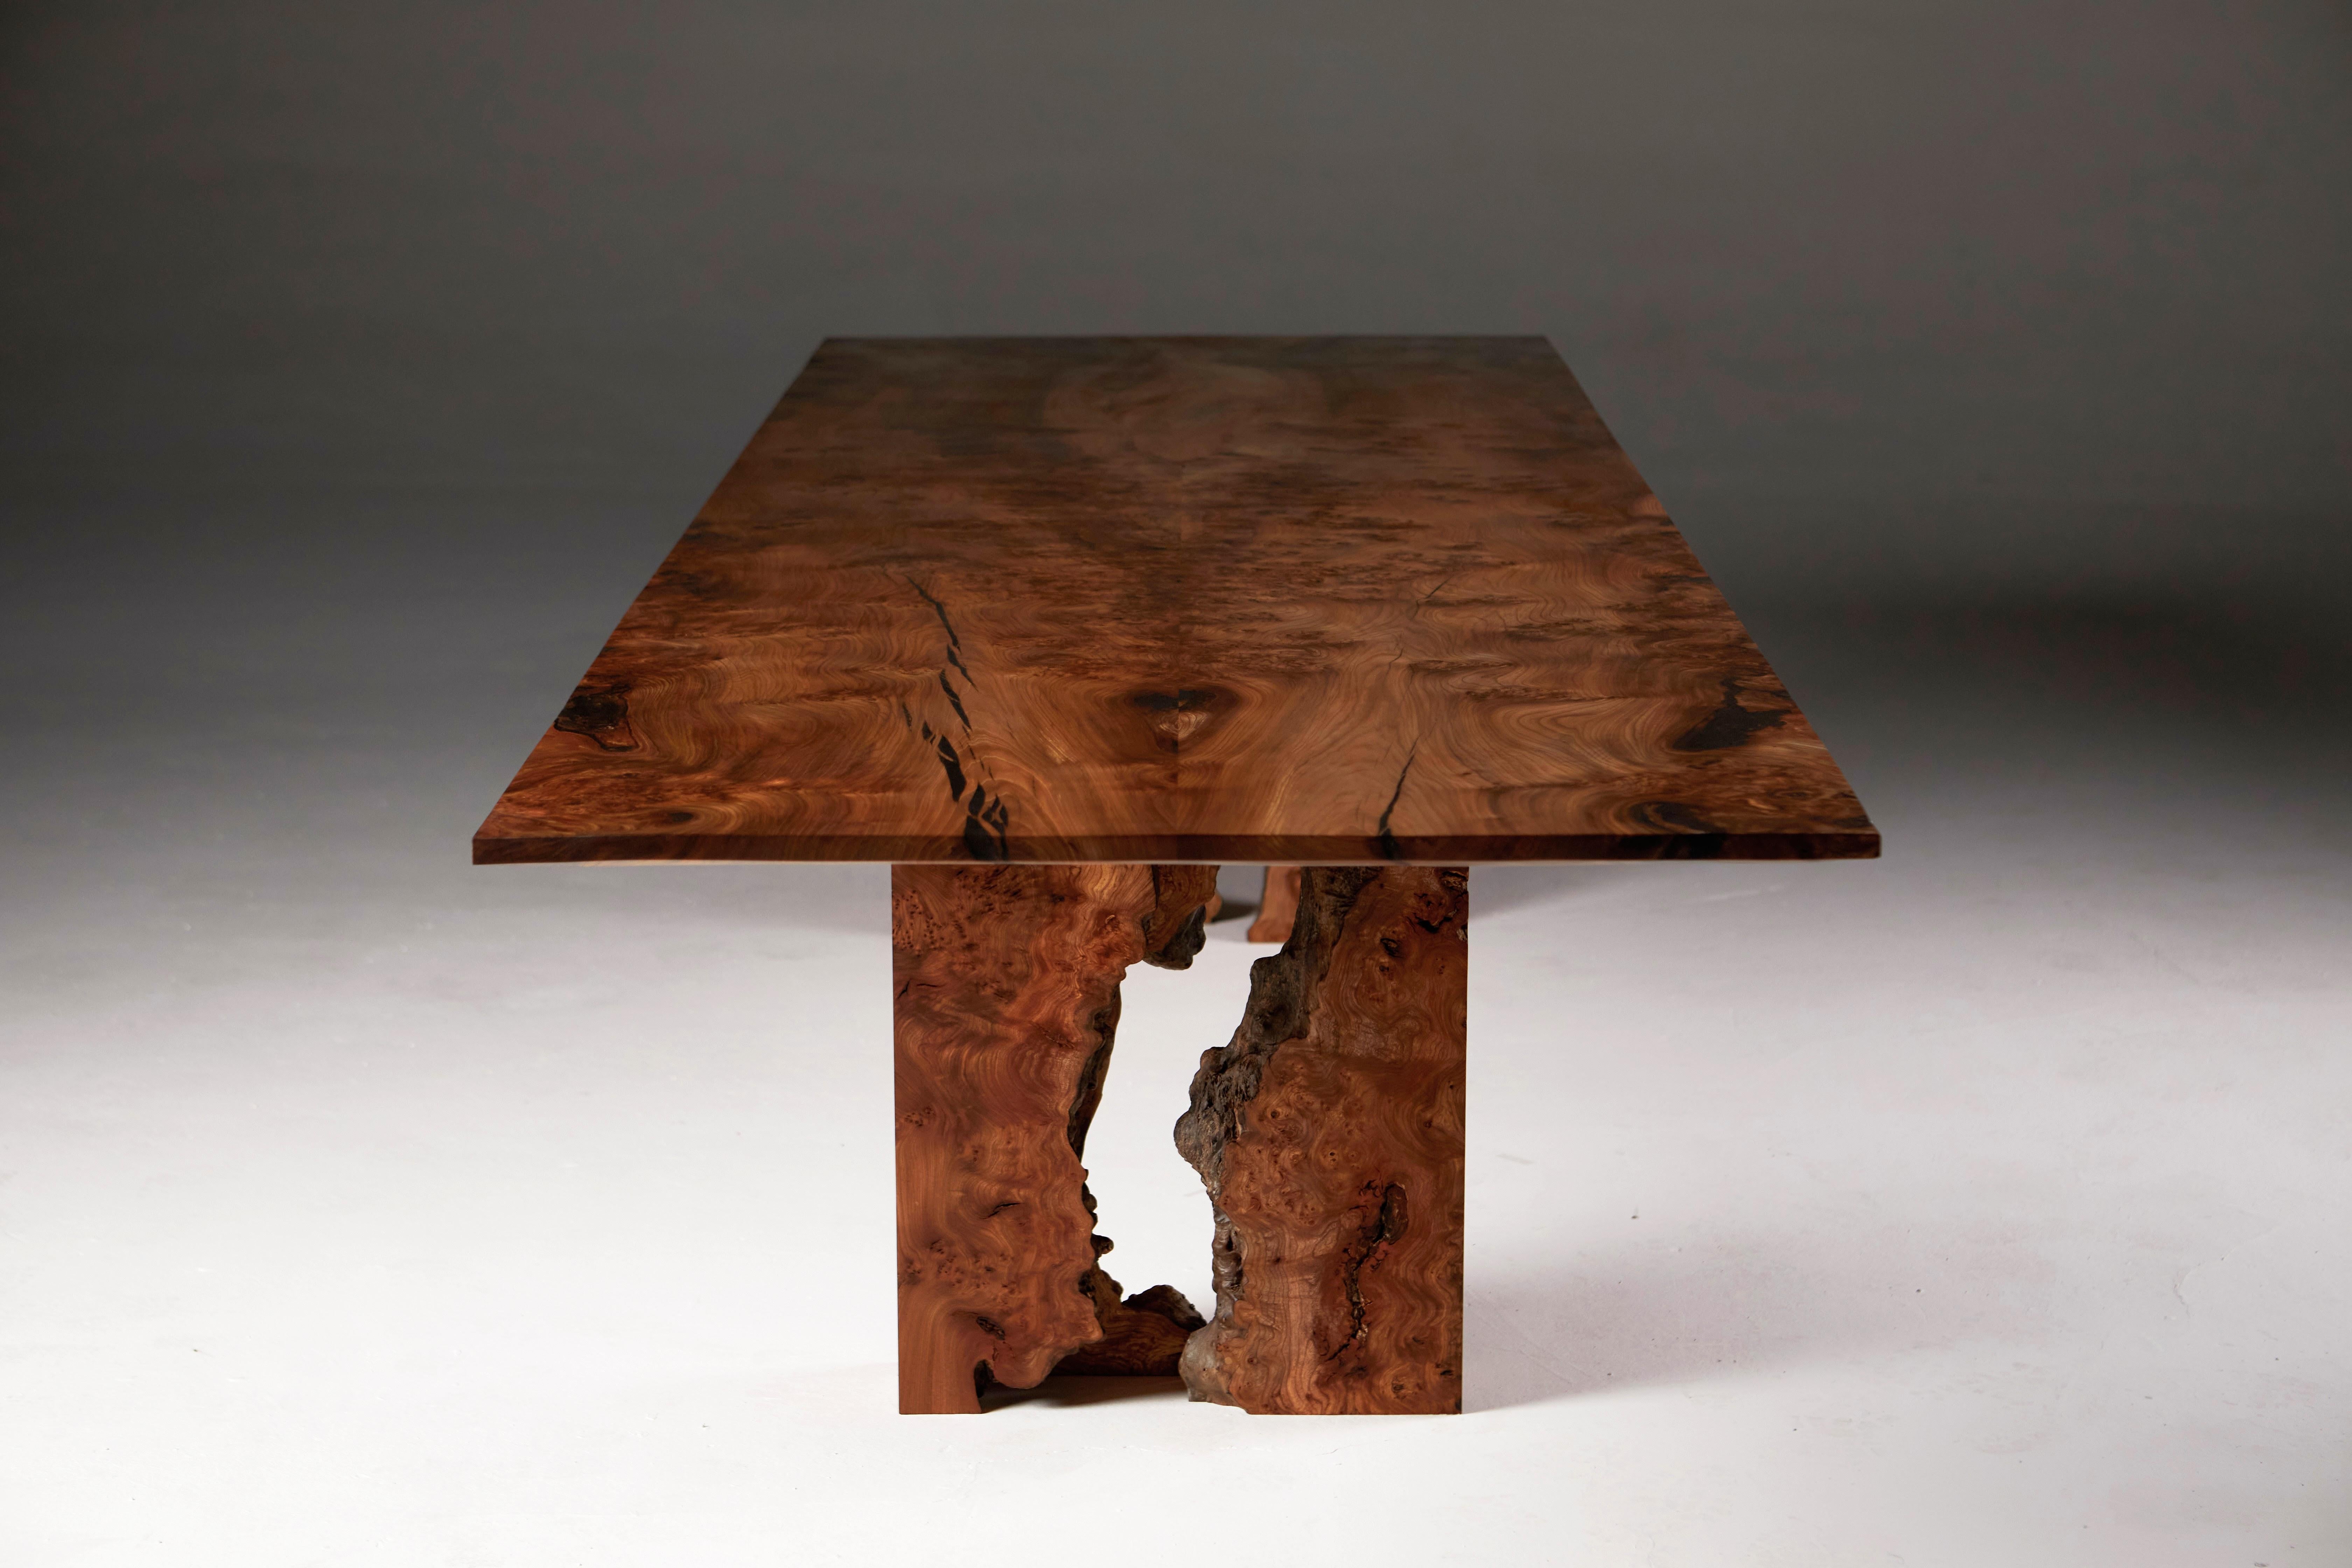 Contemporary Scottish Burr Elm Table with Inverted Live Edge Legs and Book-matched Top. 